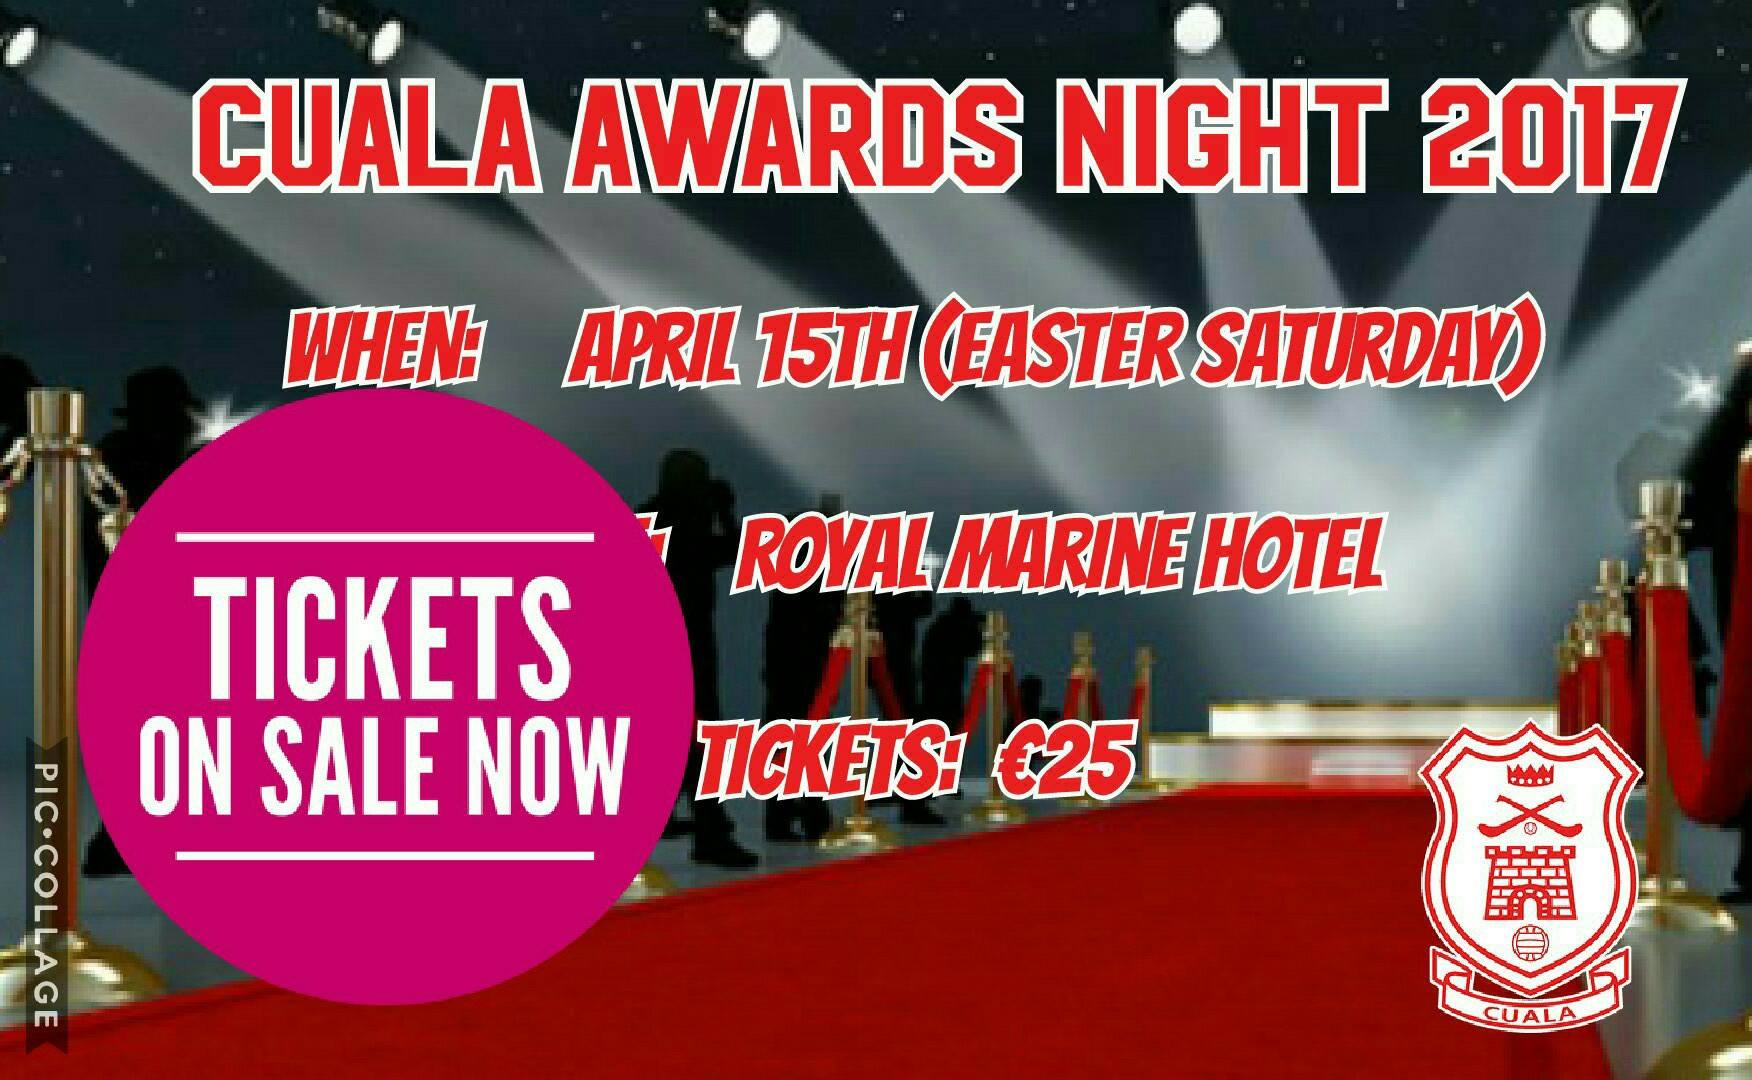 Awards Night Tickets NOW ON SALE! Cuala CLG